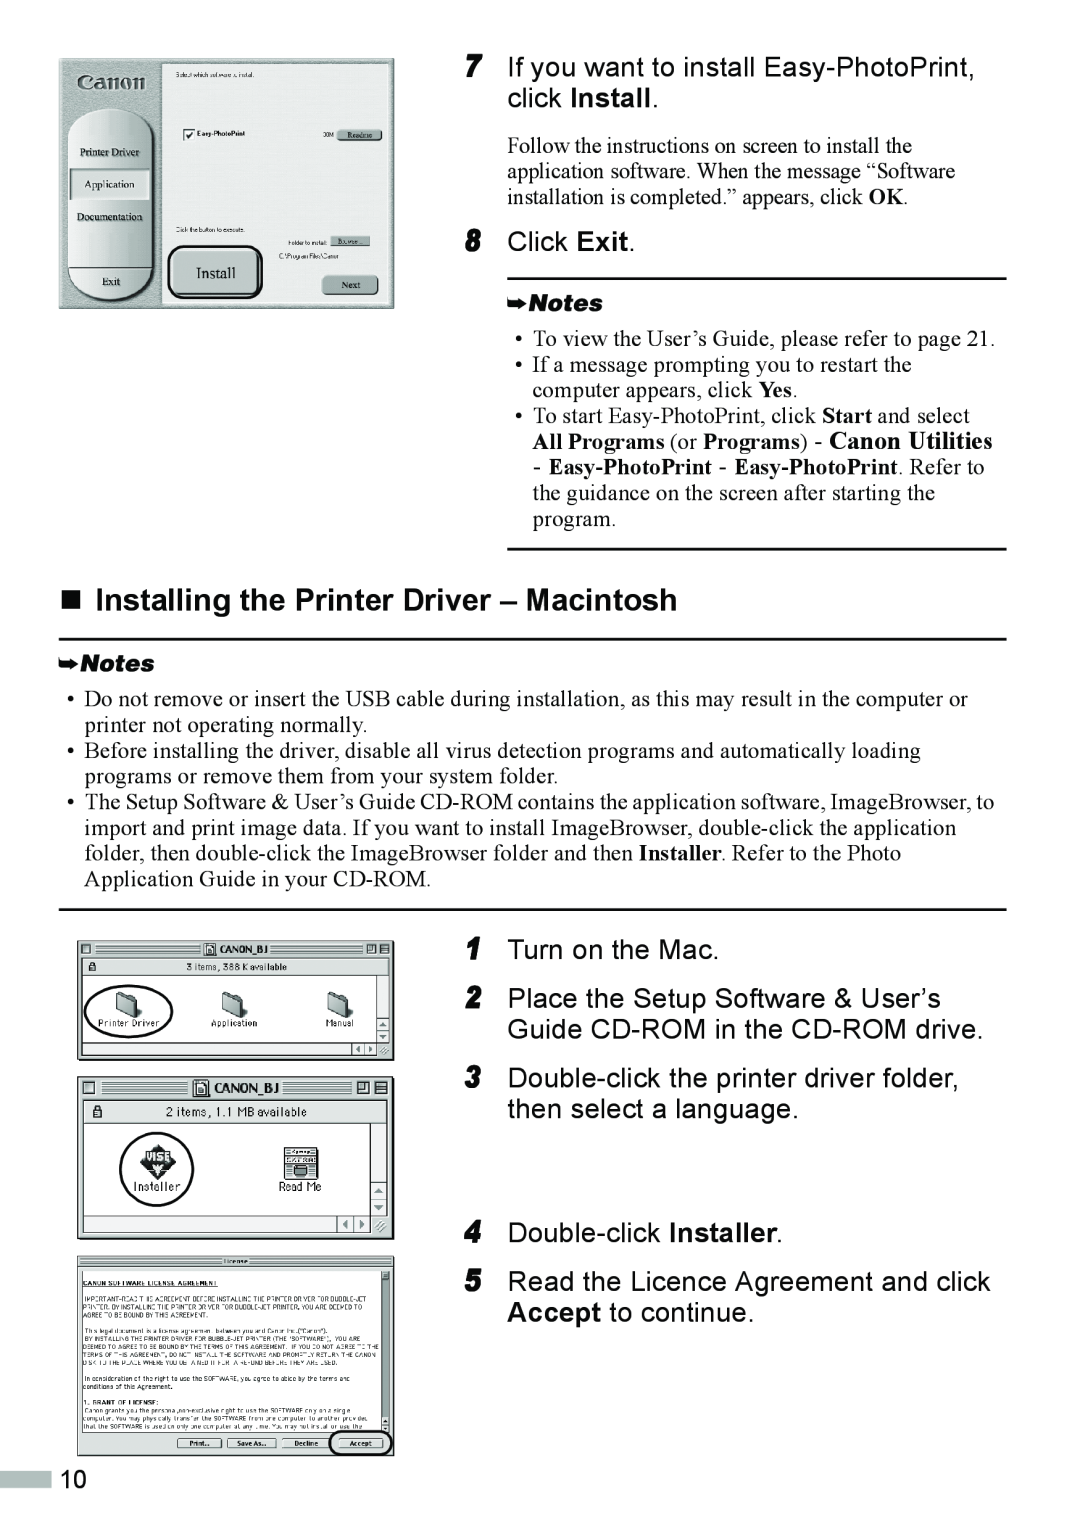 Canon 320 „ Installing the Printer Driver - Macintosh, If you want to install Easy-PhotoPrint, click Install, Click Exit 